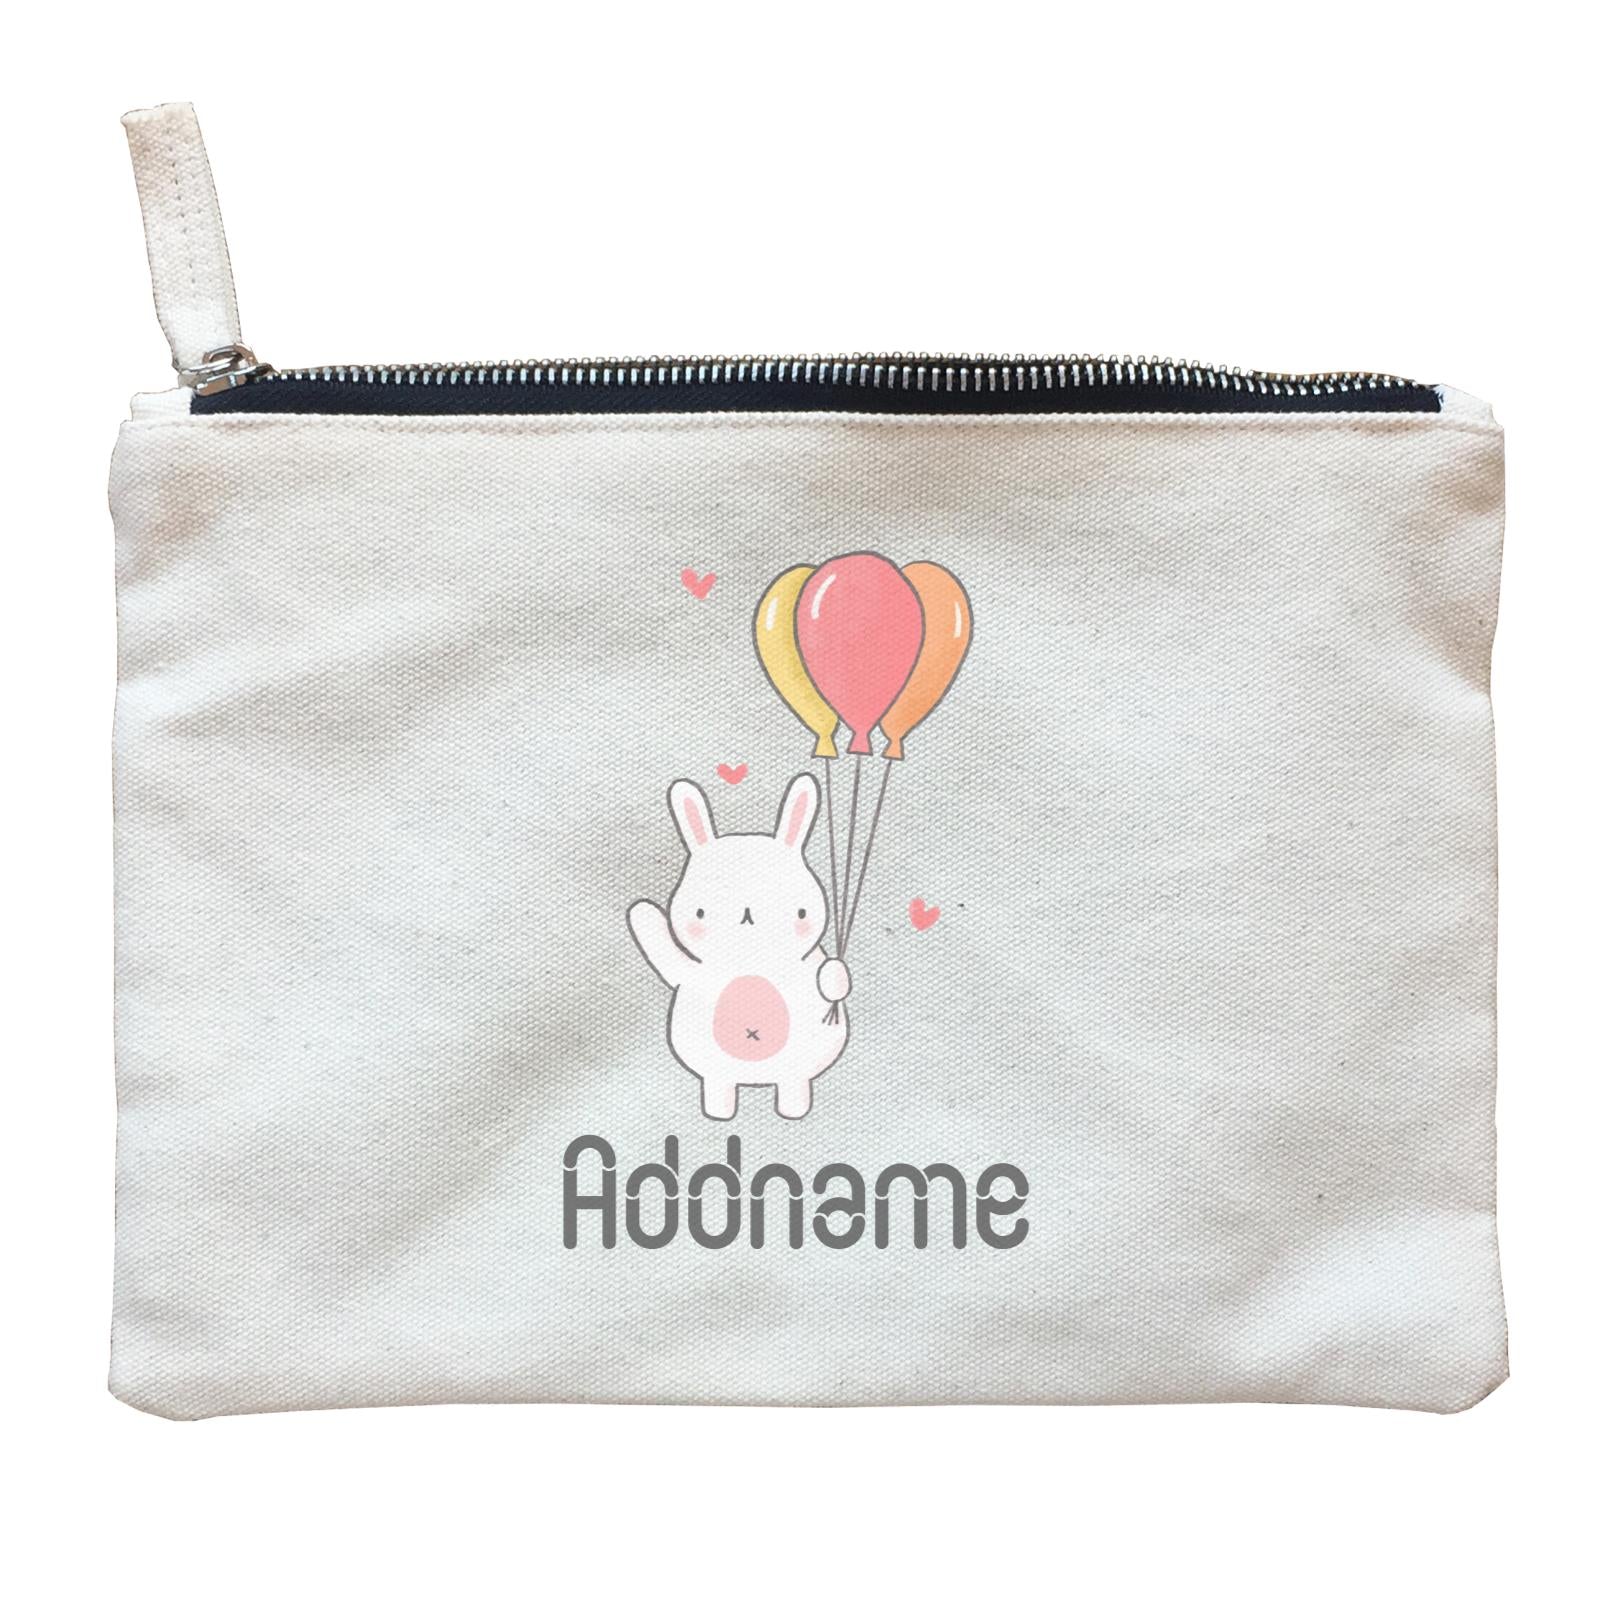 Cute Hand Drawn Style Bunny Addname Zipper Pouch